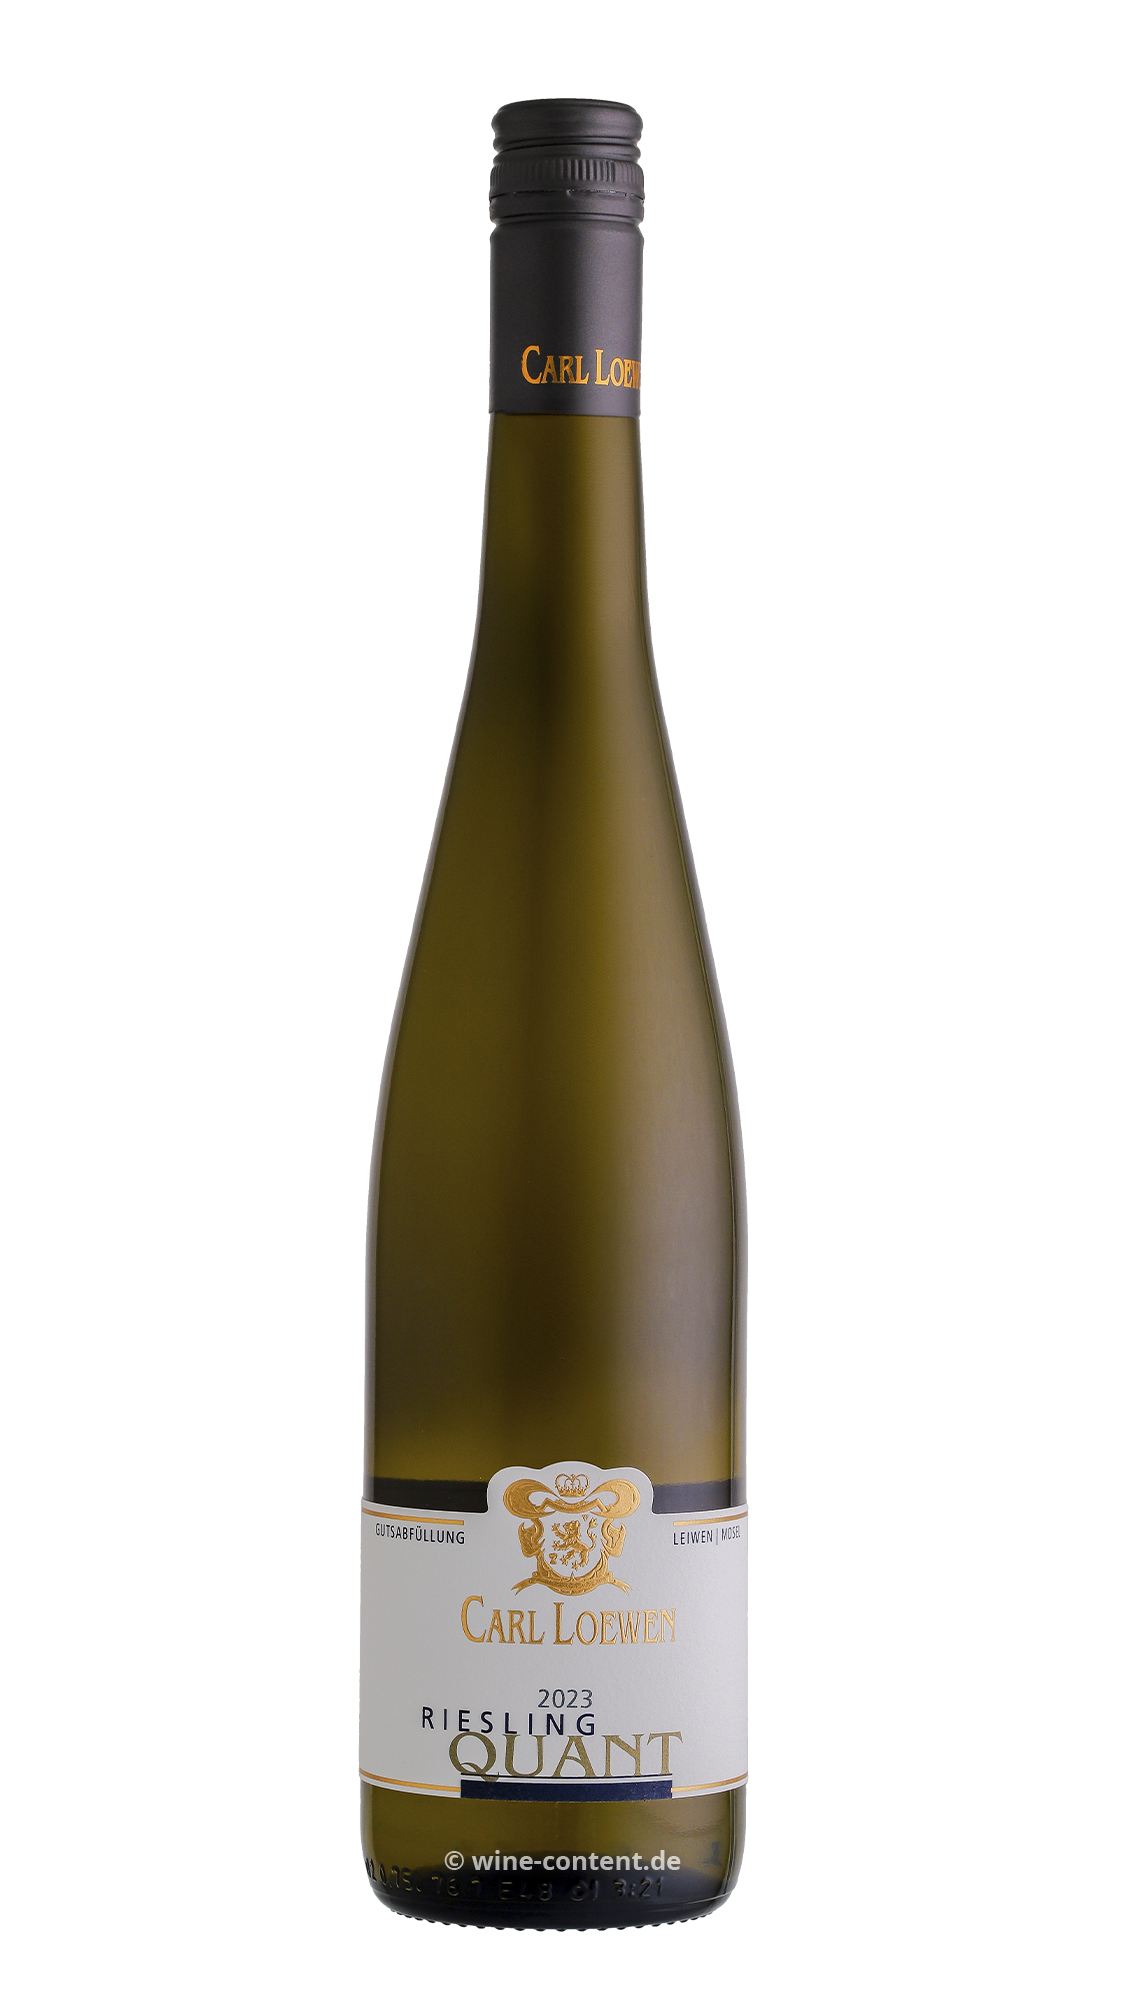 Riesling 2023 Quant